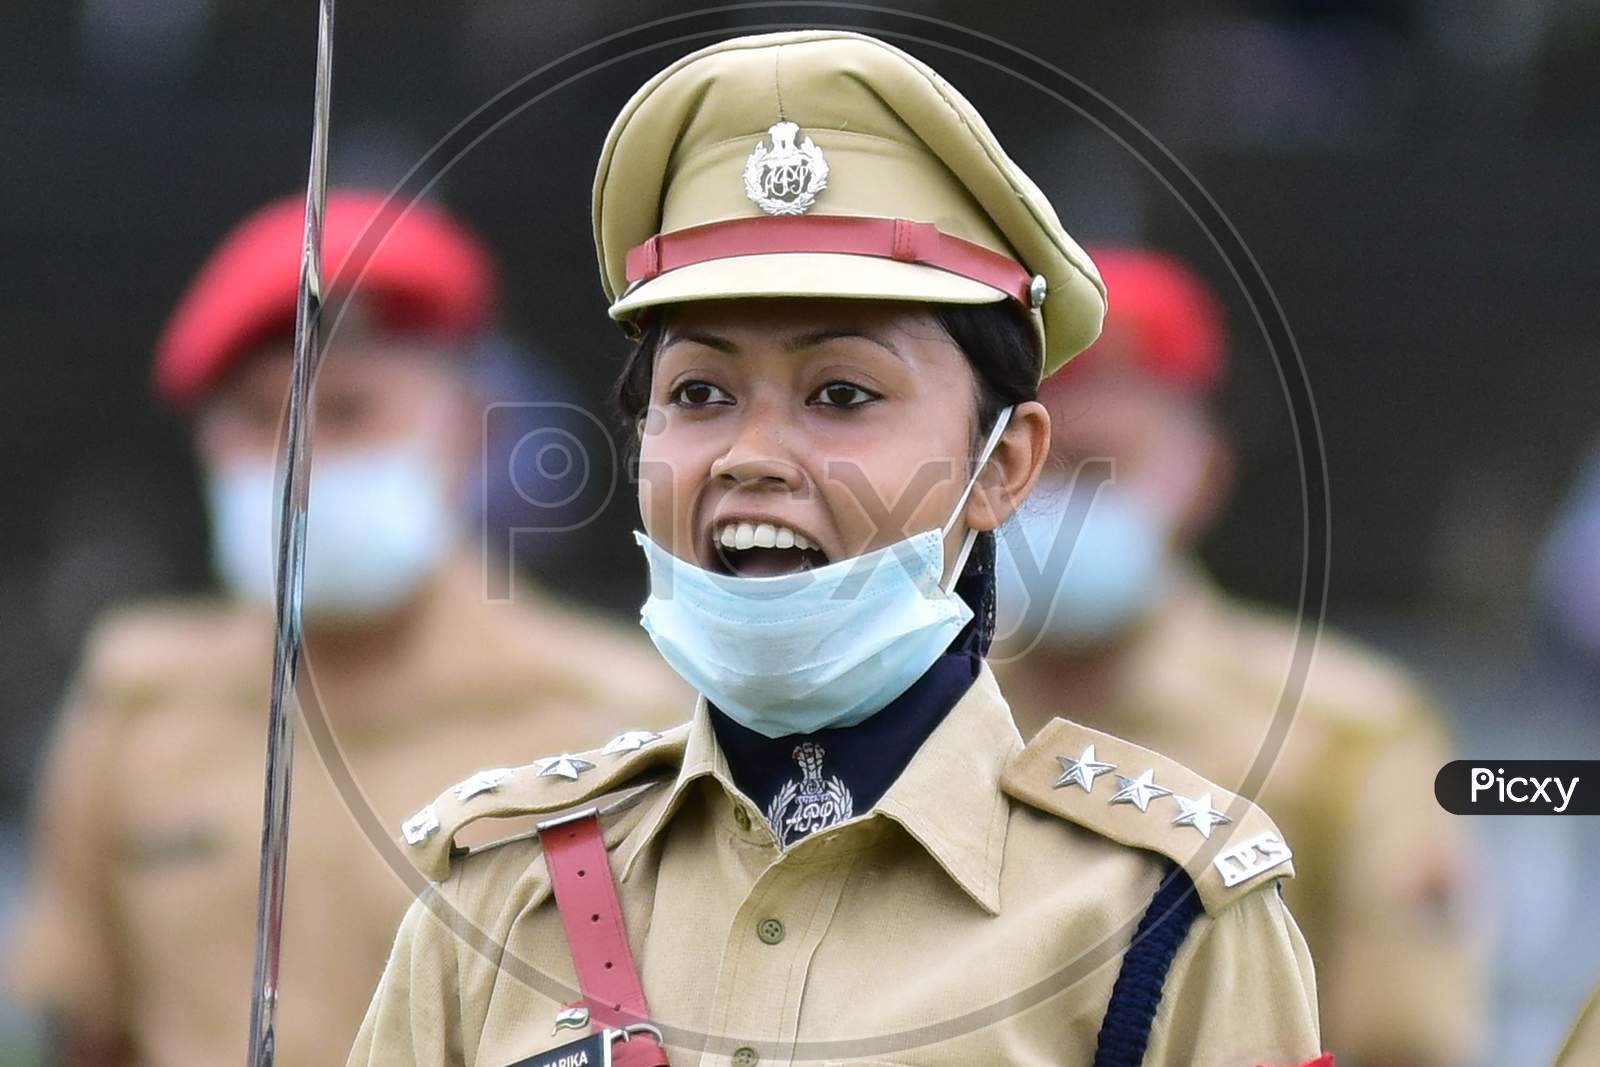 Parade Commander Shouts A Command During A Parade On The Occasion of 74th Independence Day Celebrations At Nurul Amin Stadium In Nagaon District Of Assam On August 15, 2020